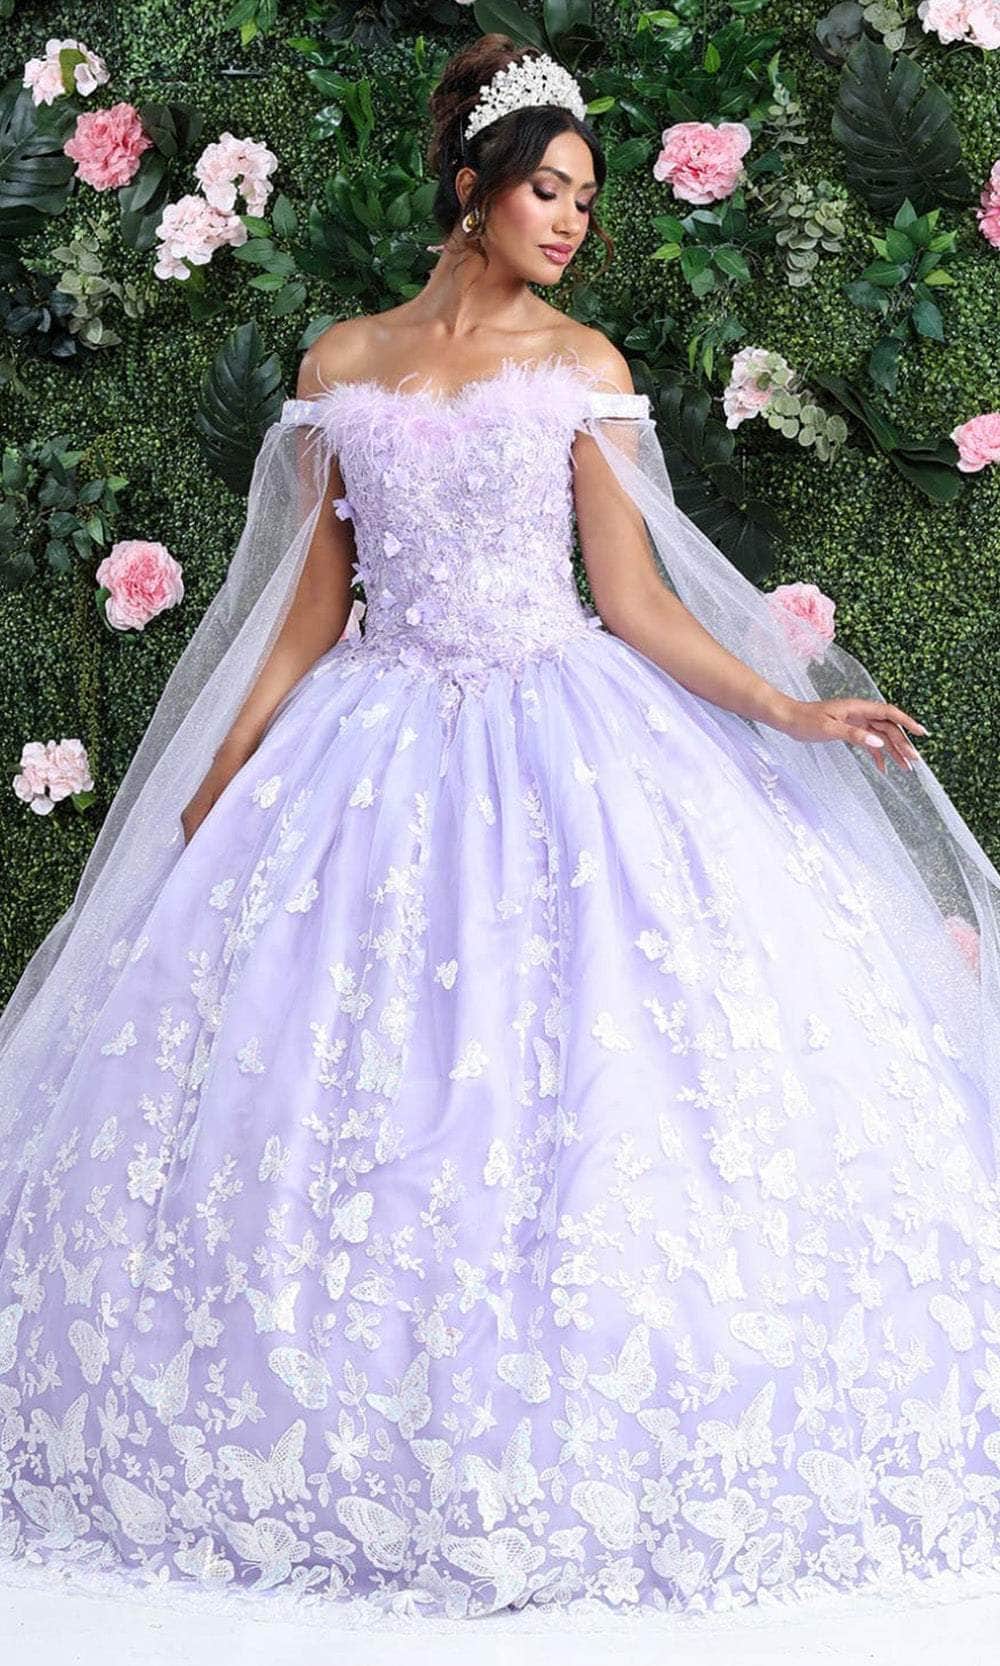 May Queen LK197 - Feather Off Shoulder Ballgown Quinceanera Dresses 